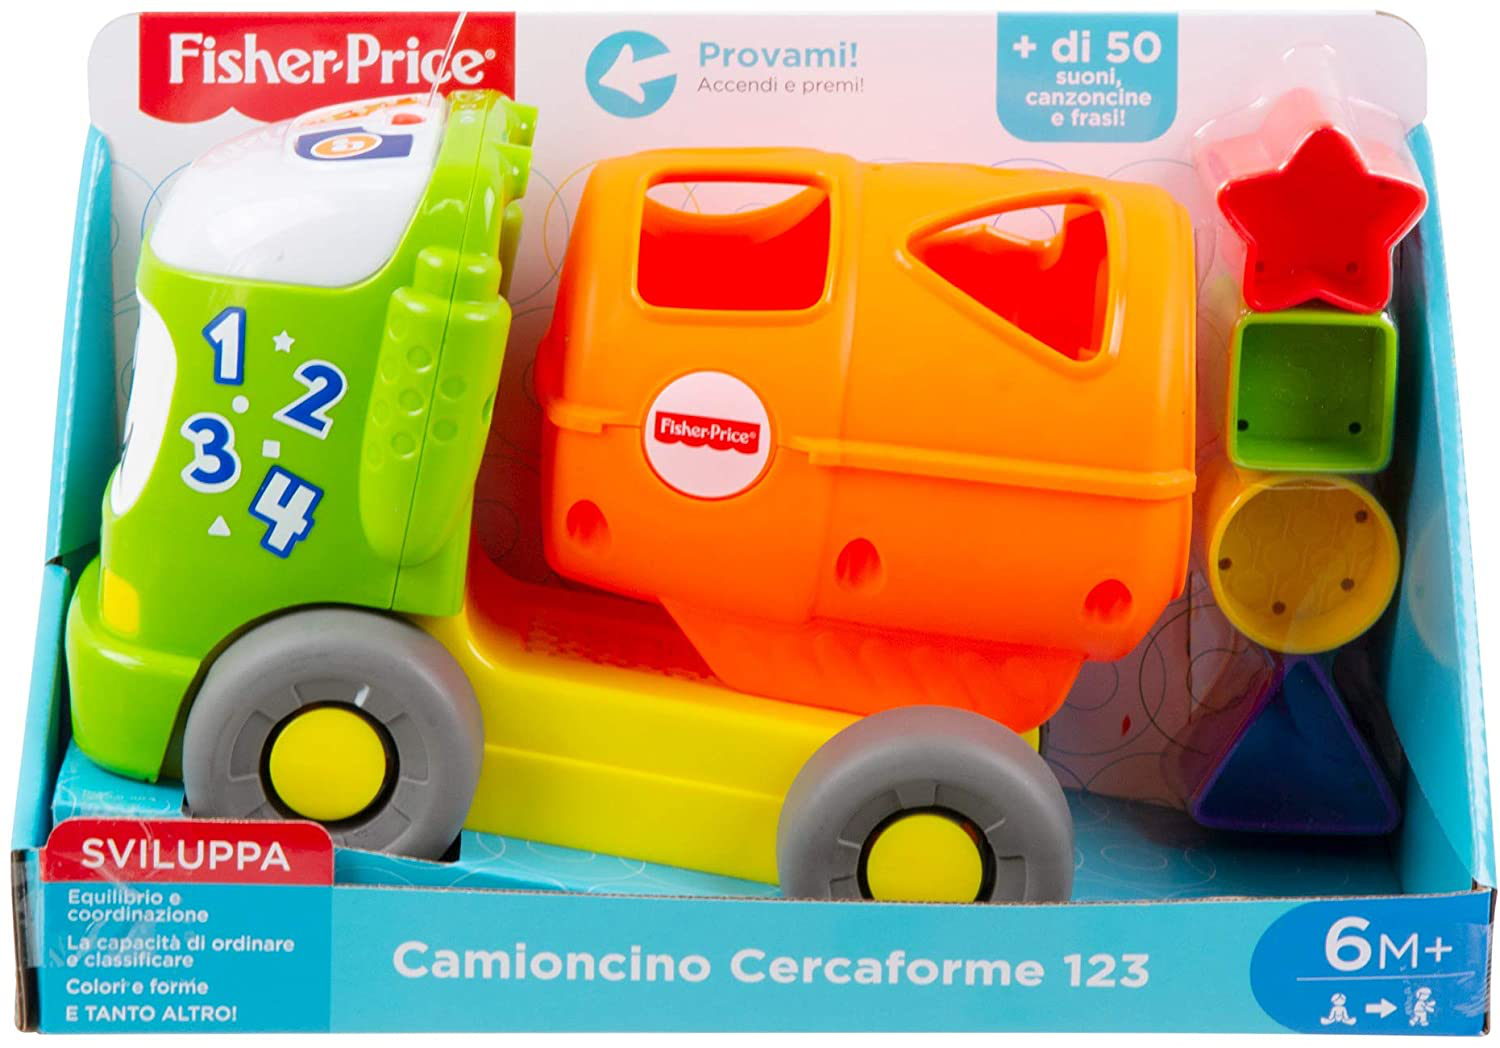 CAMIONCINO CERCA FORME FISHER PRICE